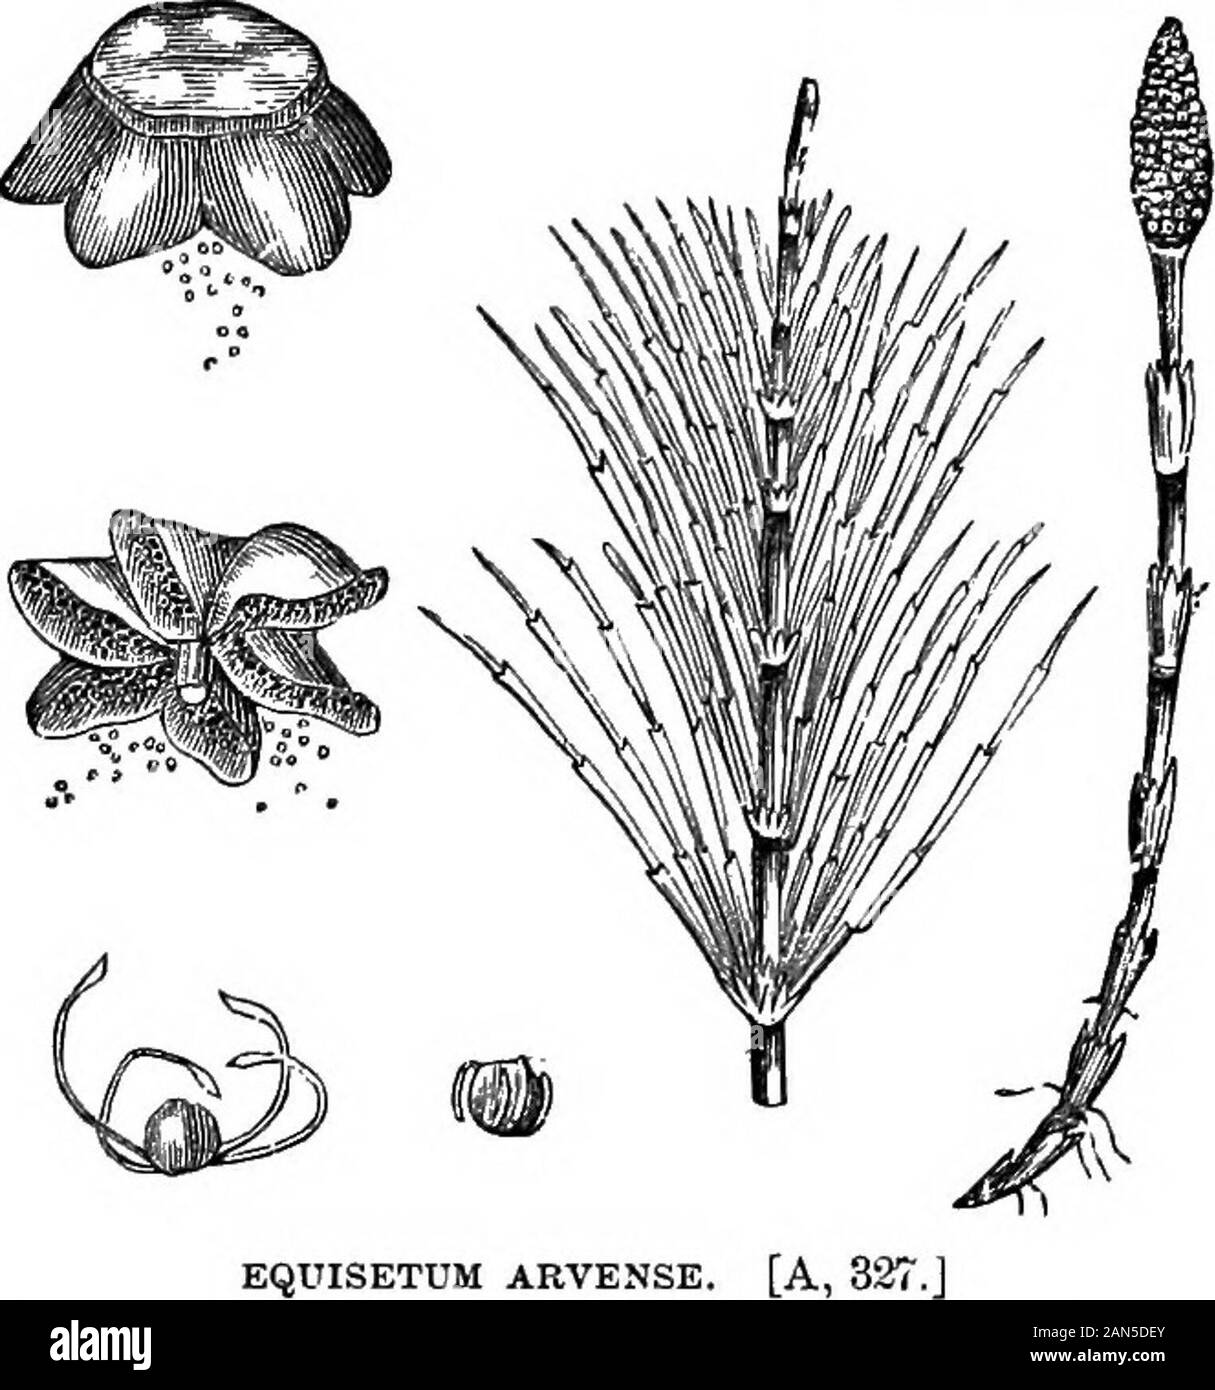 An illustrated encyclopædic medical dictionaryBeing a dictionary of the technical terms used by writers on medicine and the collateral sciences, in the Latin, English, French and German languages . division Pteridophyta. [B, 19,121,170,180 (a, 24); B. 75, 245^—E. arvense. Fr,, petil prele, verrine,queue de rat (ou de renard), jaunetrole. Ger., Ackeirkandelwisch,Ackerschachtelhalm, Kanne.nhtUut, Zinnheu, Duivock, Pferde-schwanz, Katzenwedel. The field-horse tail or bottle-brush ; a spe-cies growing in meadows and low sandy places in Europe, NorthAmerica, and northern Asia and Africa. The stalks Stock Photo